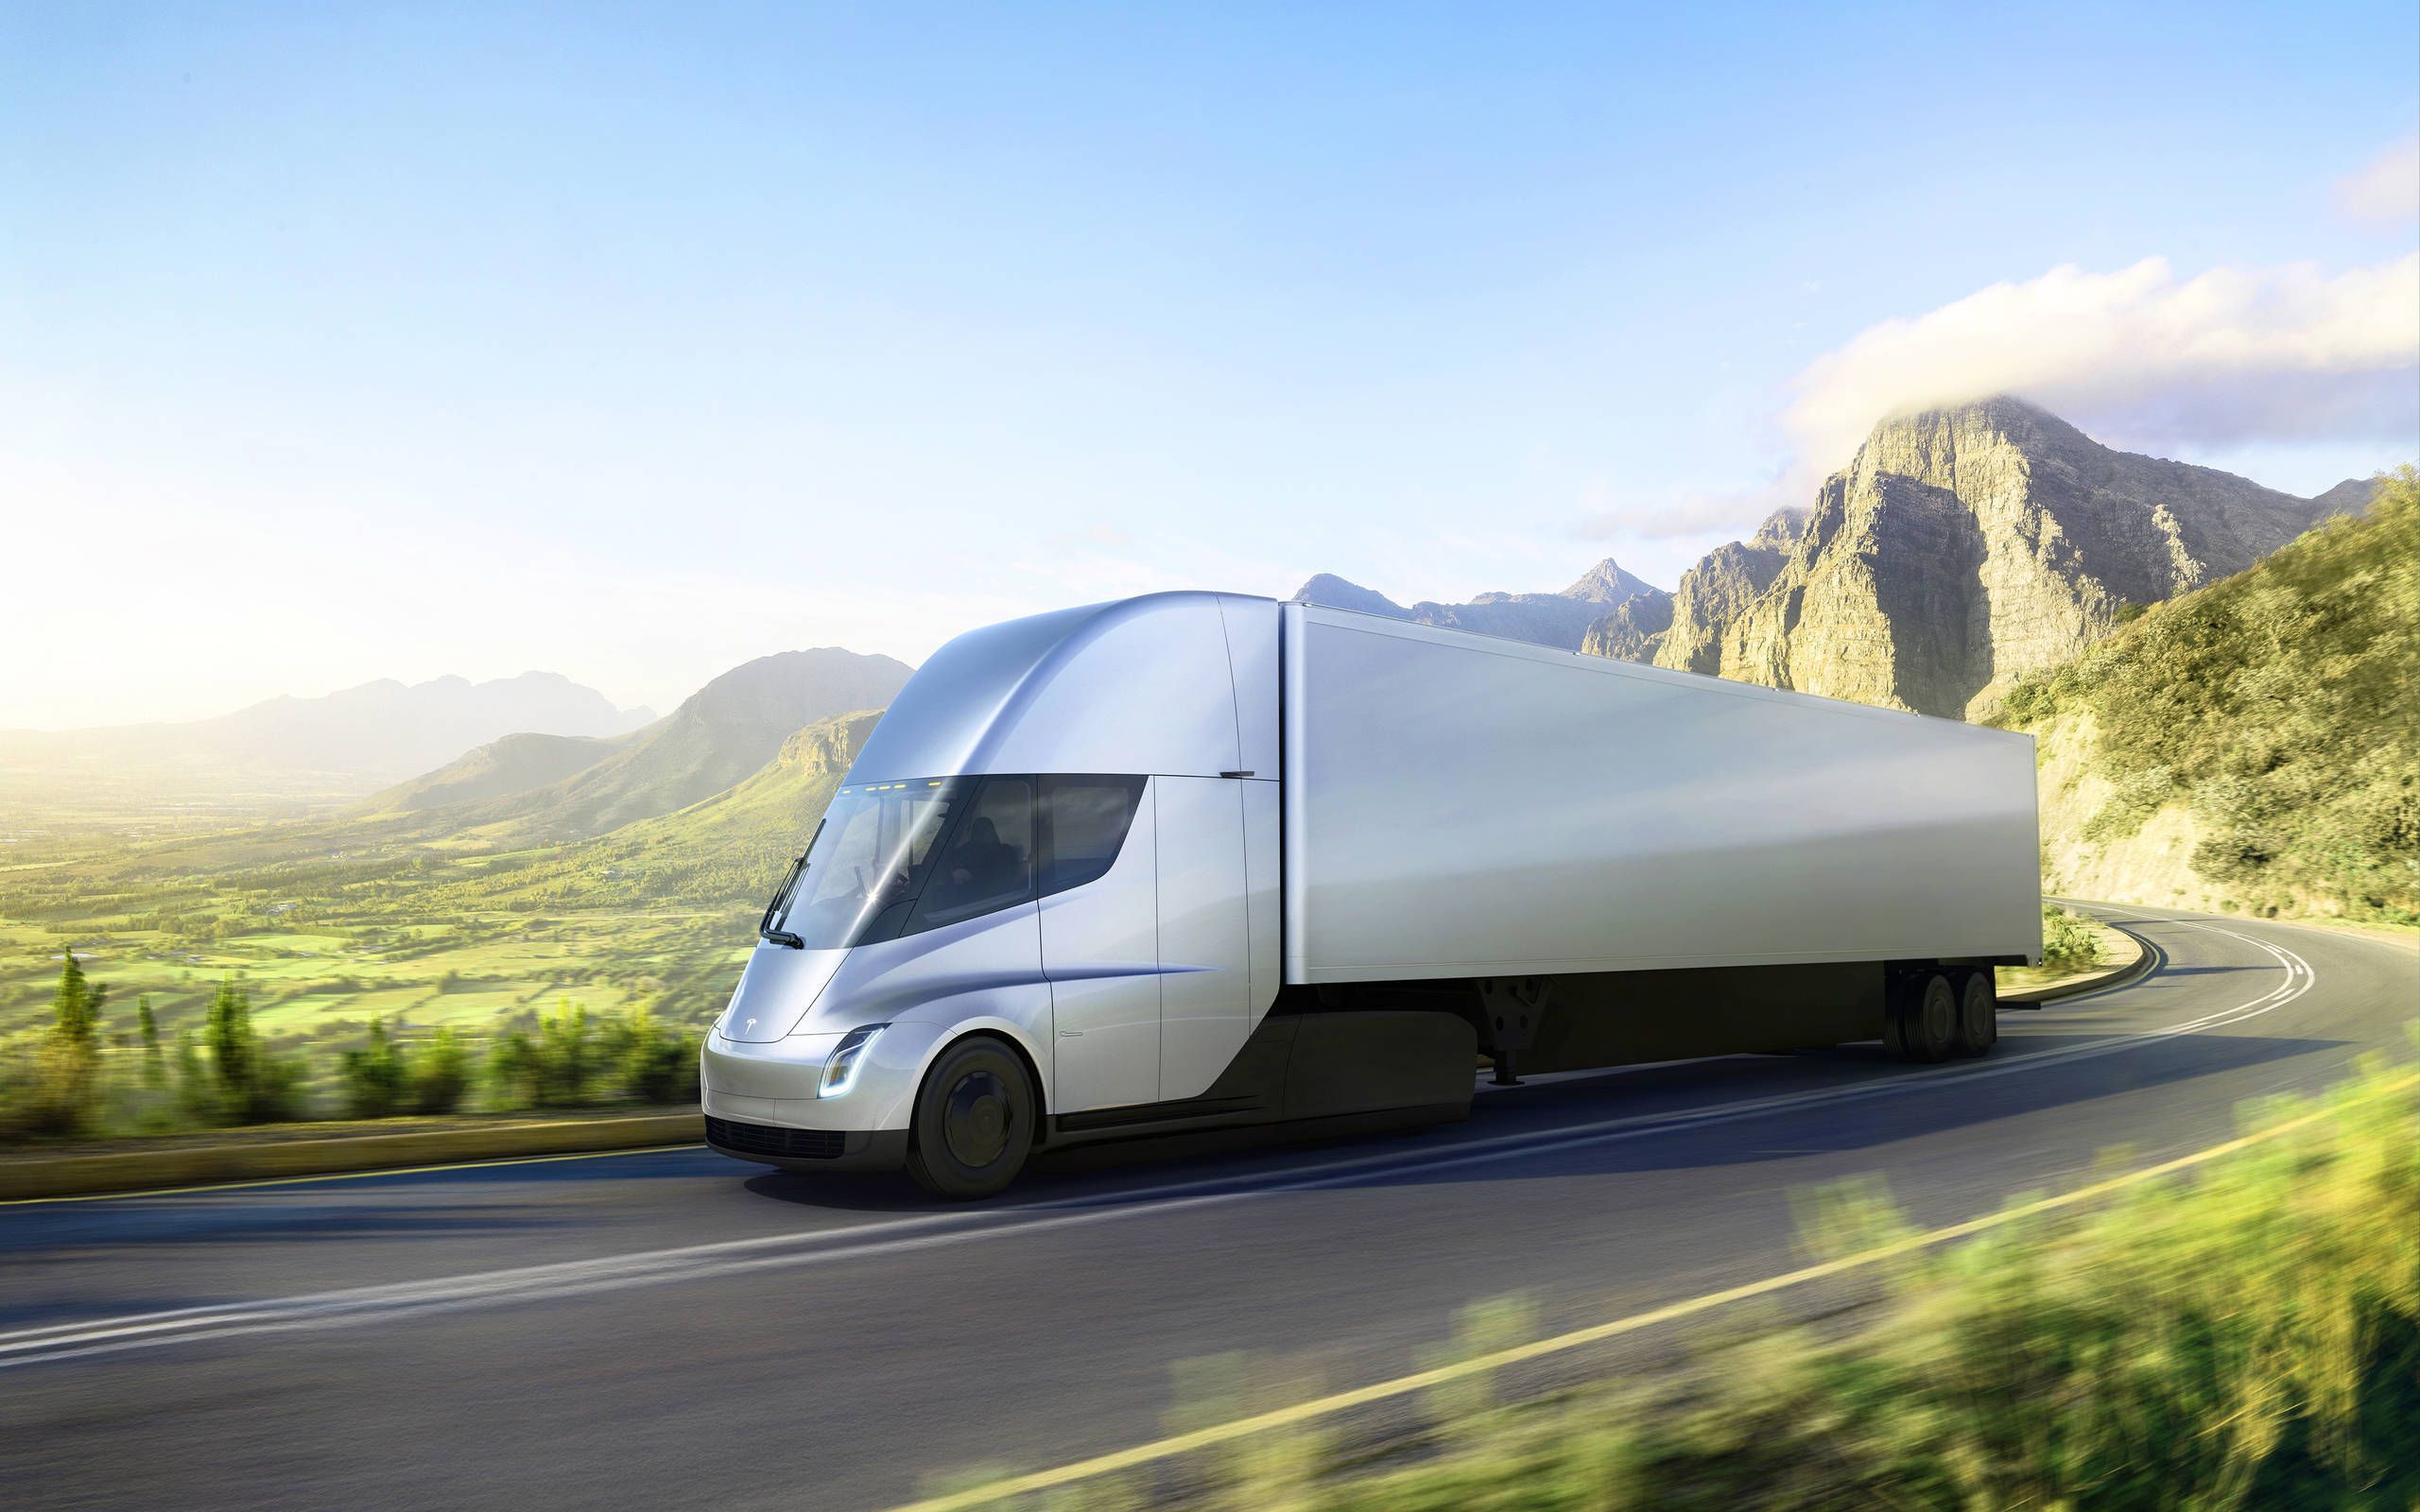 Tesla finally delivered its first electric semi trucks